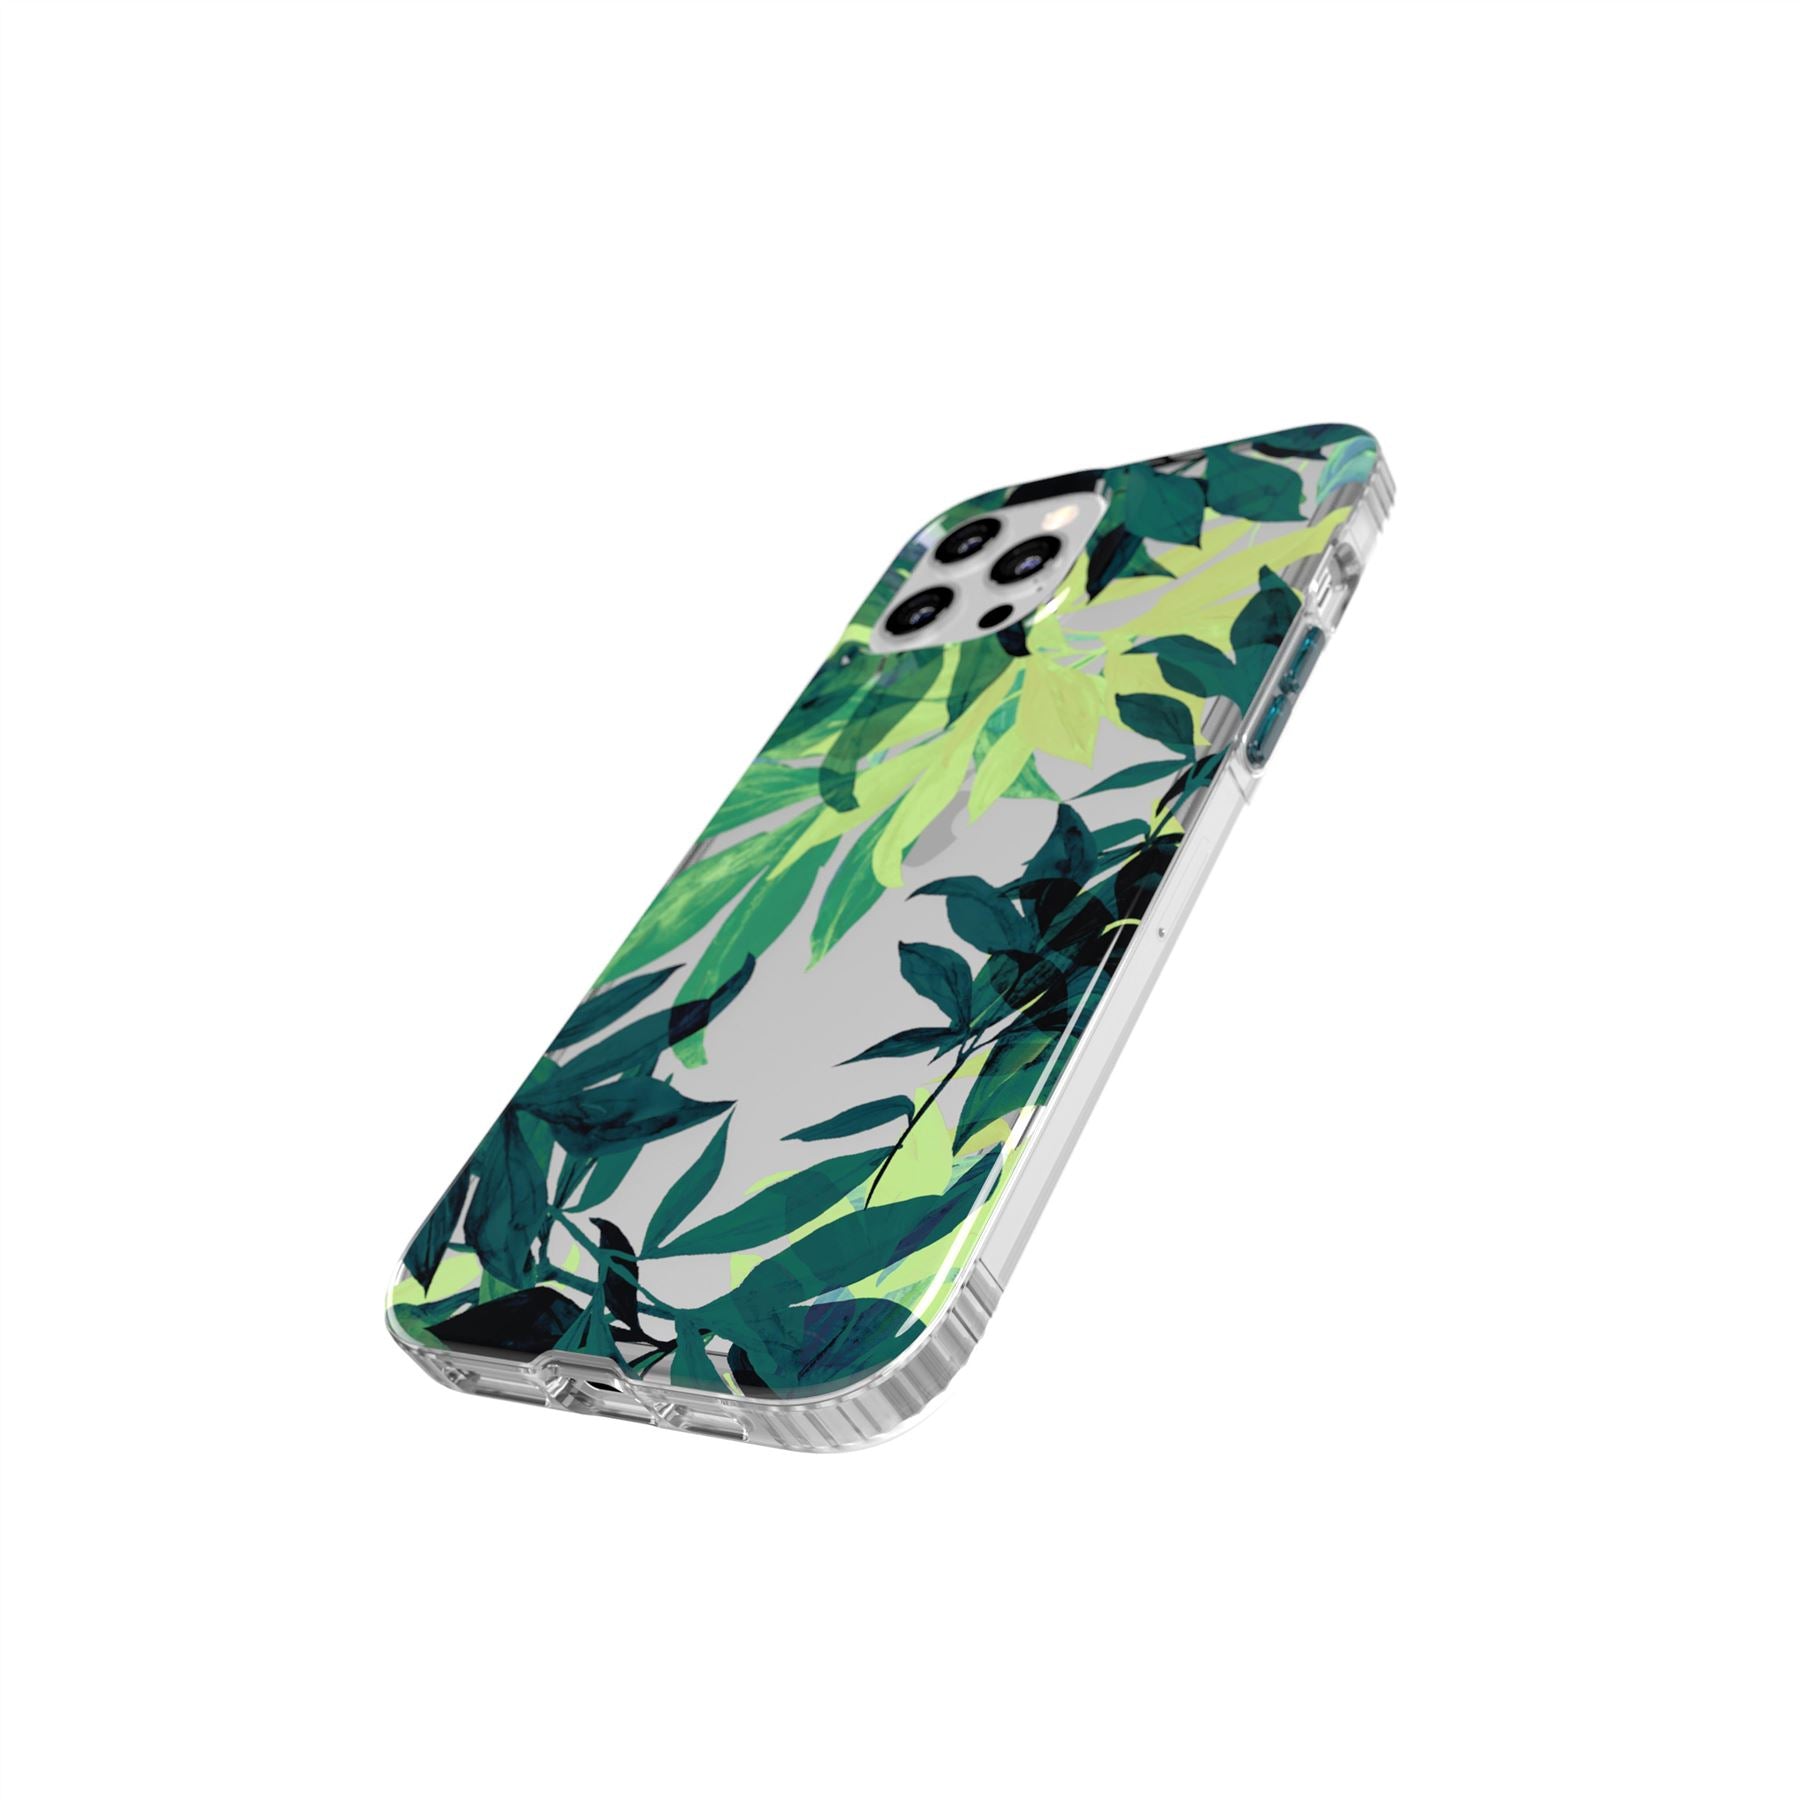 Evo Art - Apple iPhone 12 Pro Max Case- Forest Green